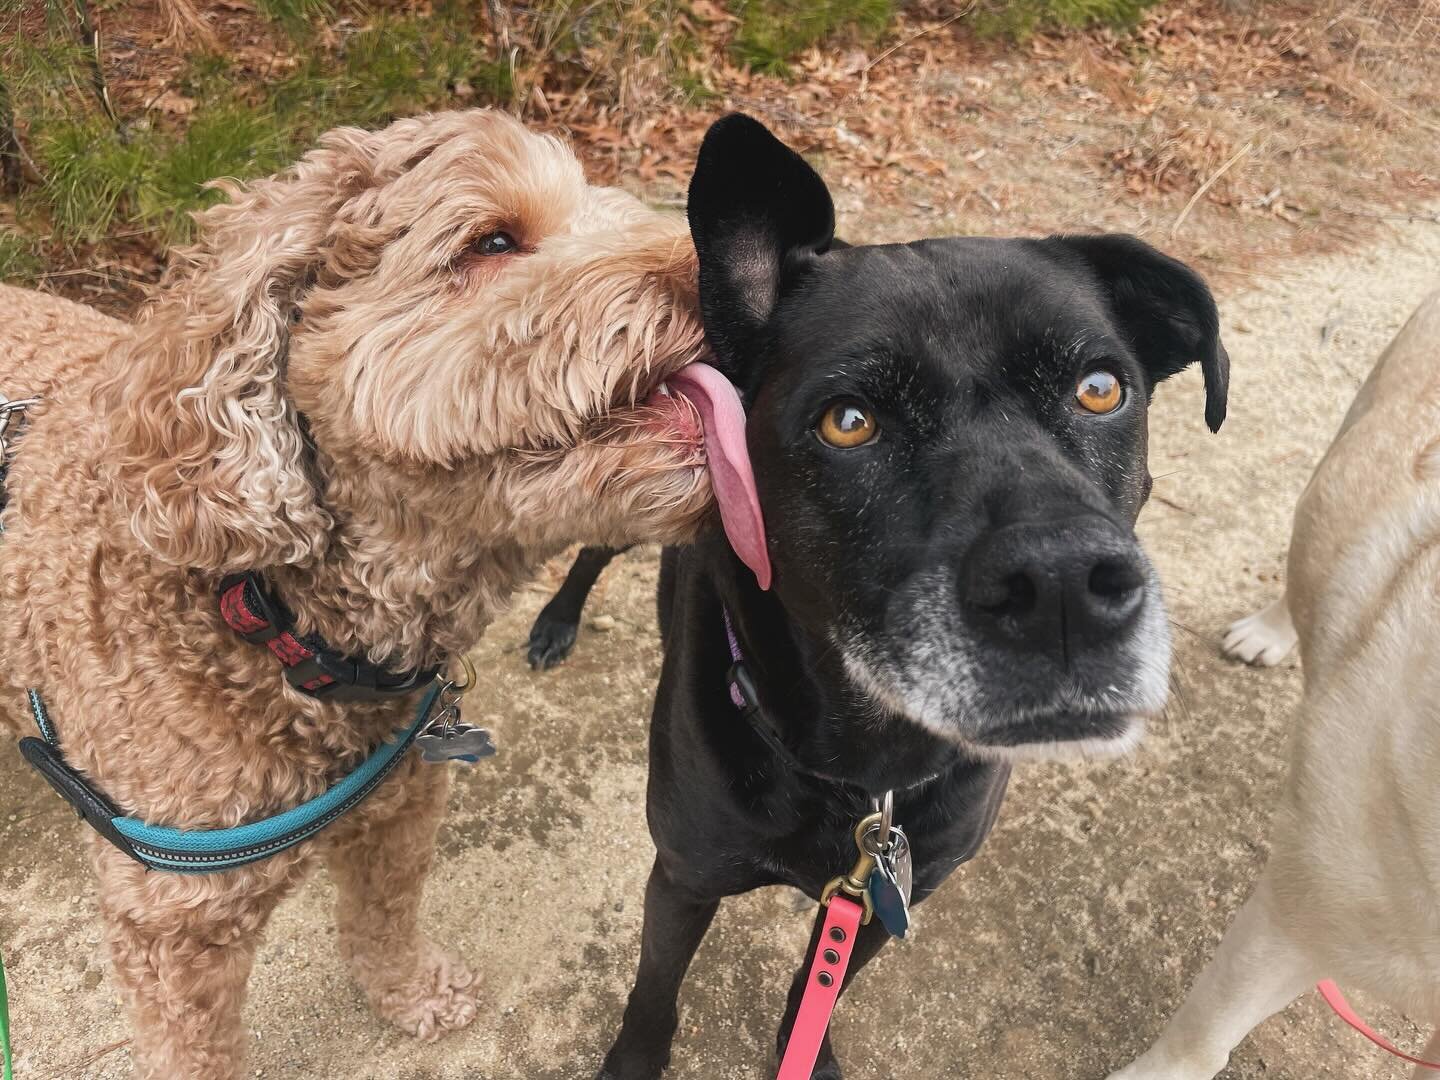 Kisses on the trail today (mainly from Murphy 💋 👅)

#dogsgohiking #dogsofinstagram #doodlesofinstagram #goldendoodle #labradoodle #mutts #muttsofinstagram #goldenretriever #dogwalker #southshorema #northshorema #scituate #hingham #norwell #cohasset